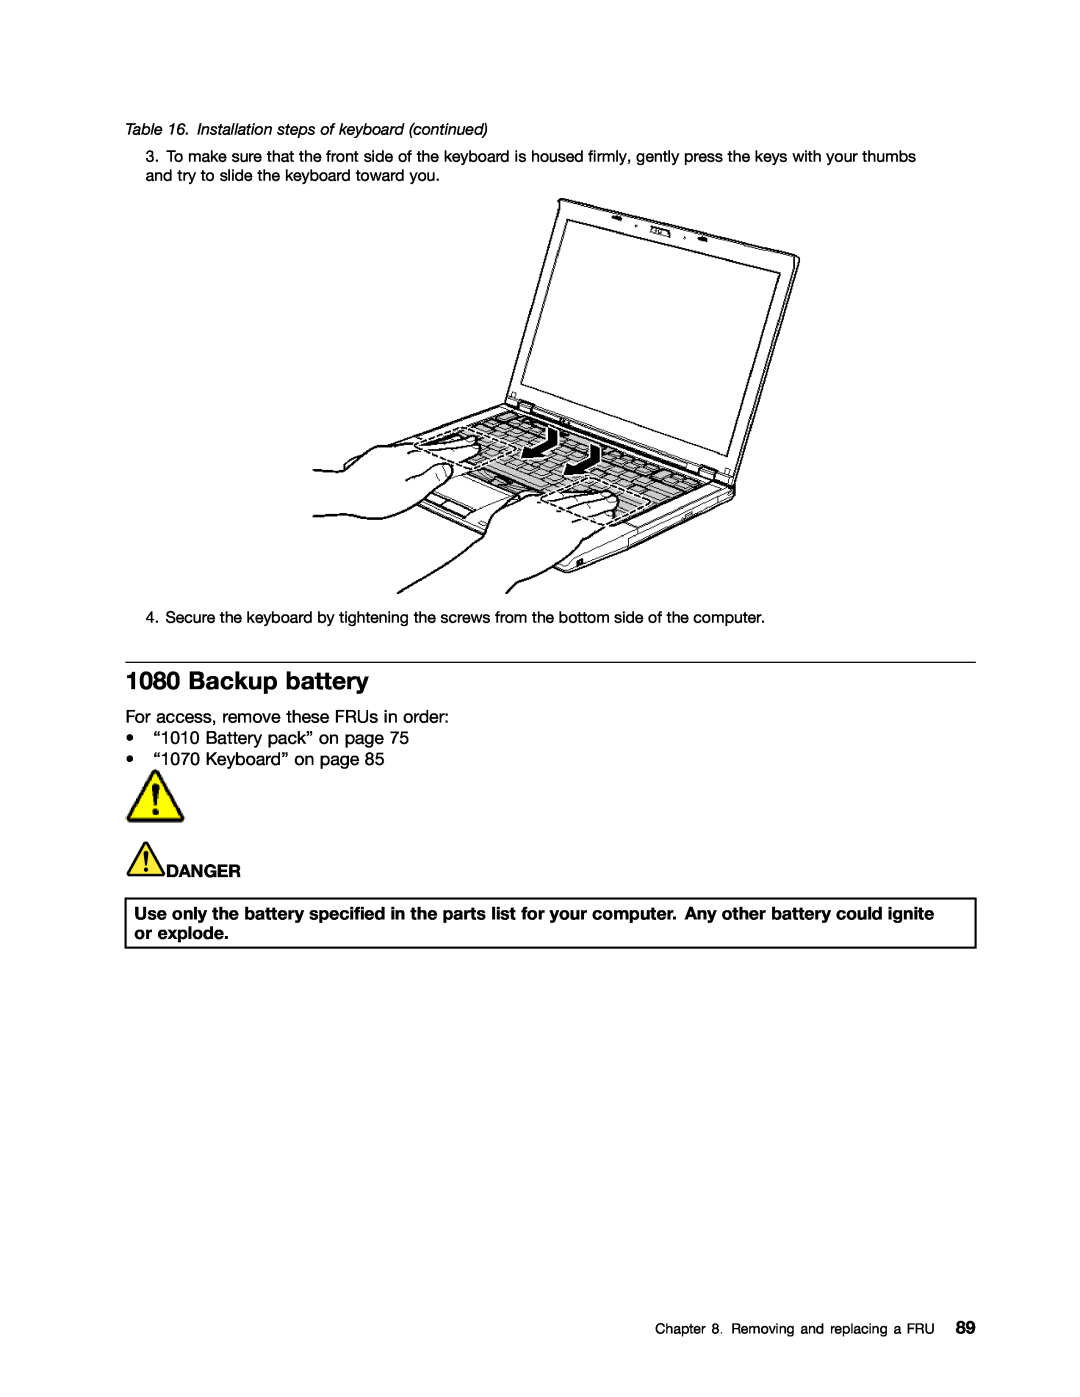 IBM T410SI, T400S manual Backup battery, Danger, Installation steps of keyboard continued 